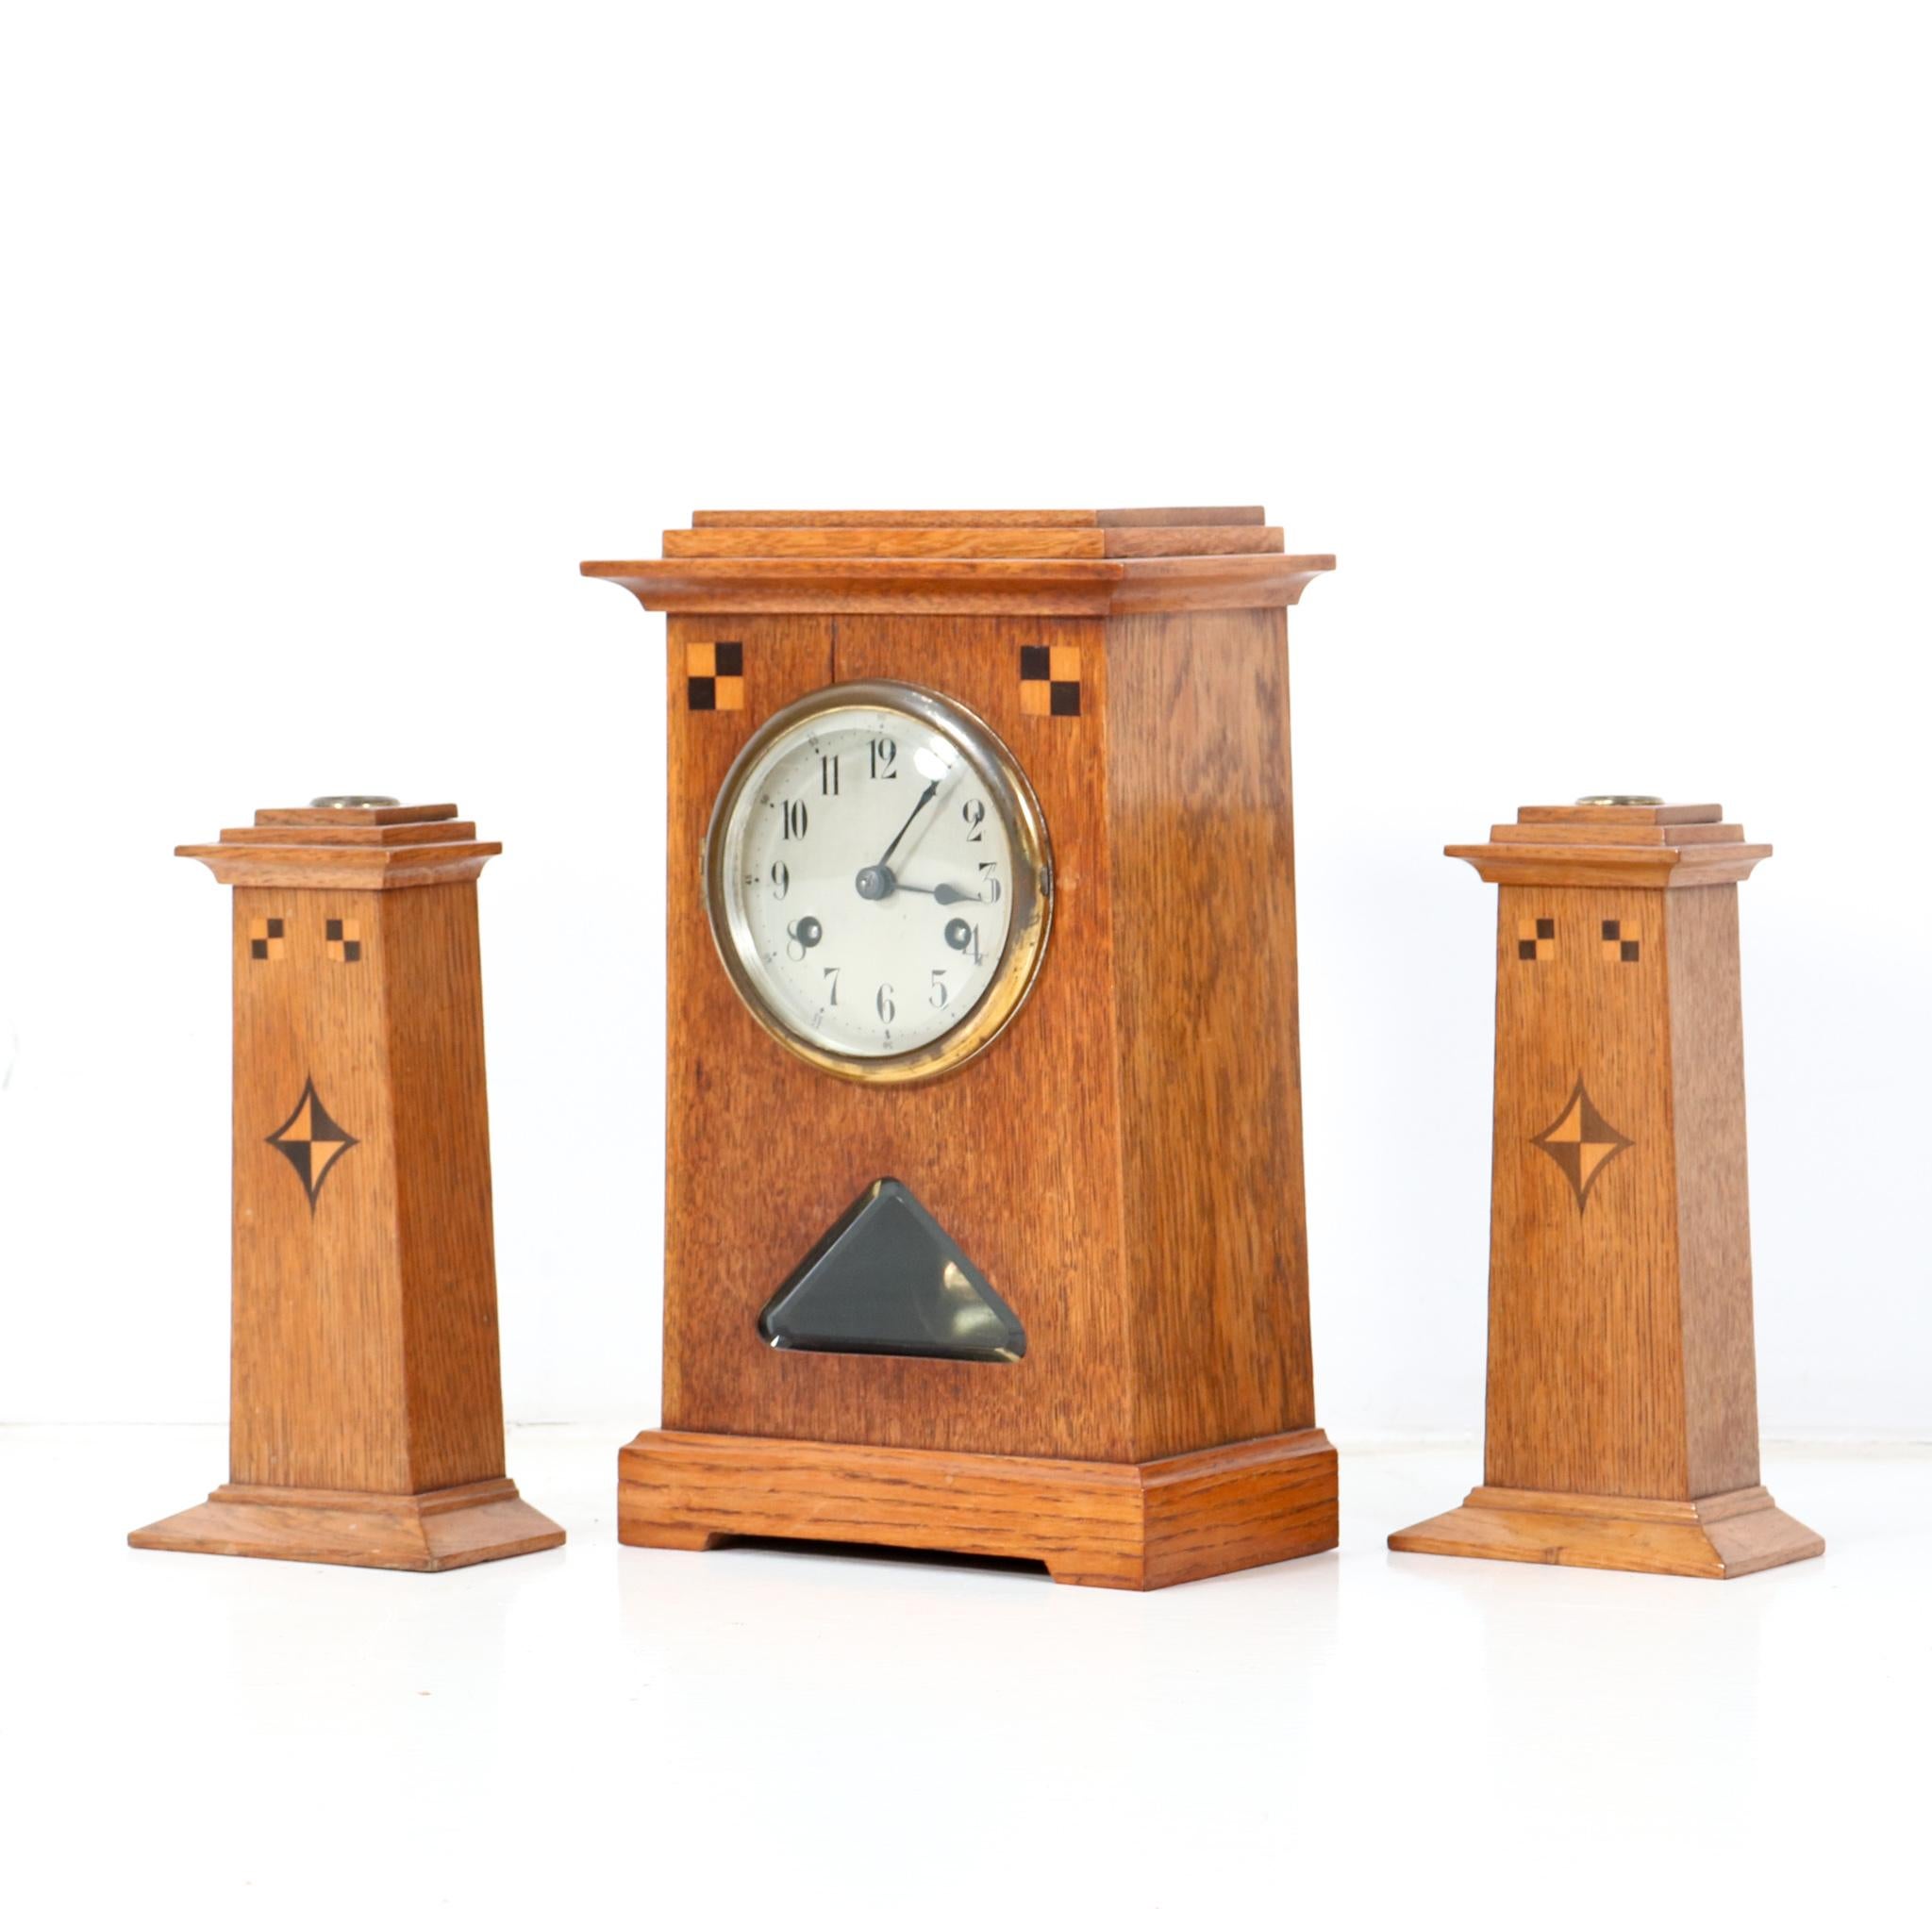 Stunning Art Nouveau Jugendstil clock set with mantel clock and two candle sticks.
Striking Dutch design from the 1900s.
Solid oak with inlay and original key.
This wonderful clock set is in very good original condition with minor wear consistent